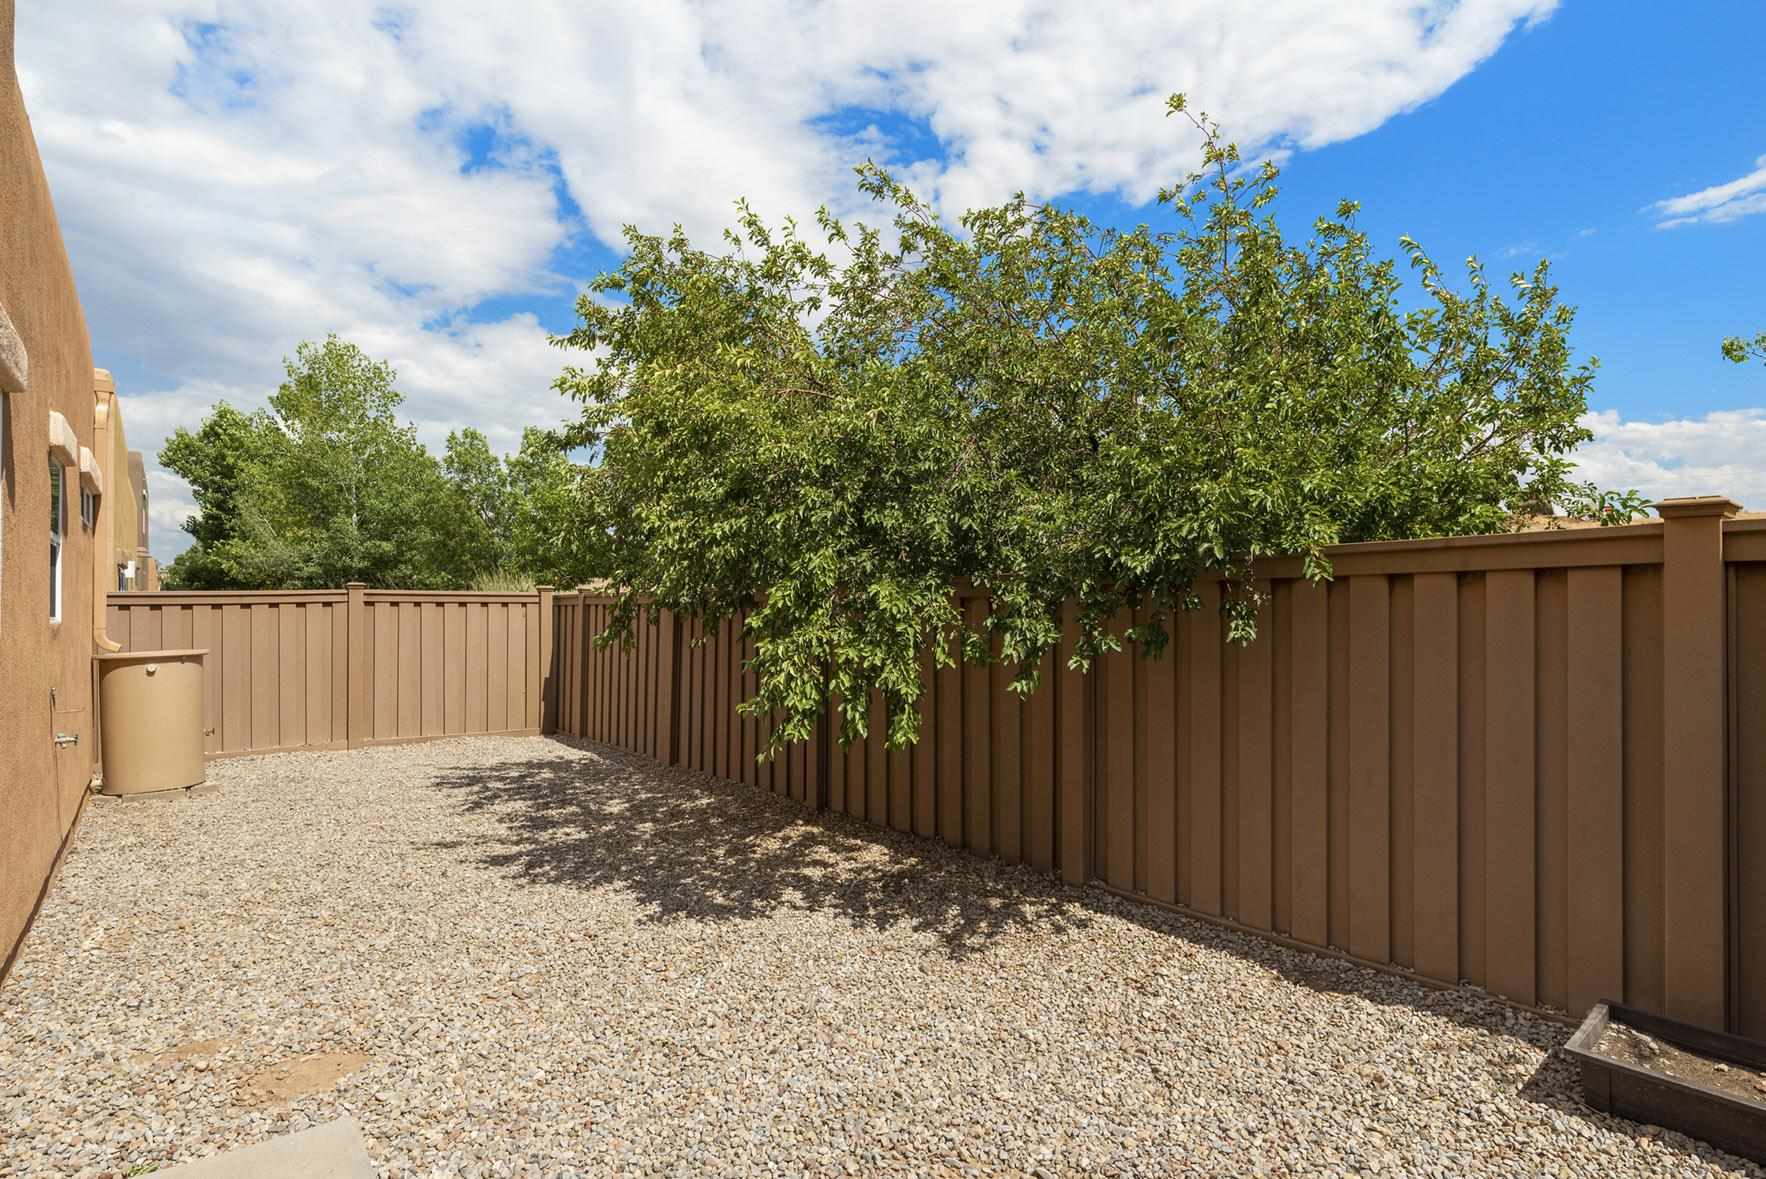 22 Sunset Canyon, Santa Fe, New Mexico 87508, 4 Bedrooms Bedrooms, ,2 BathroomsBathrooms,Residential,For Sale,22 Sunset Canyon,202102742